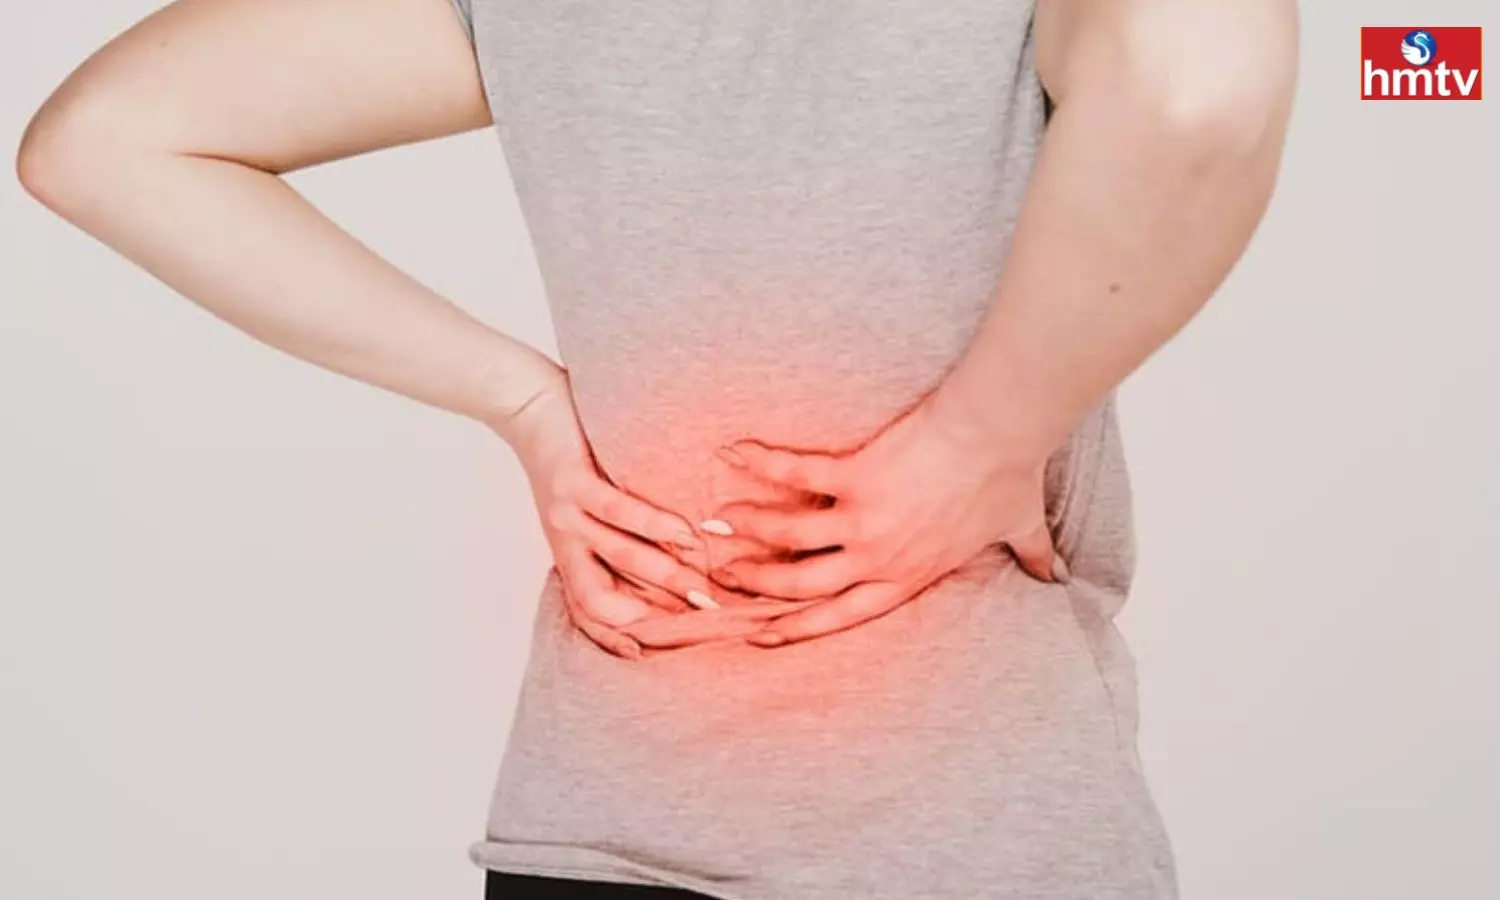 The Real Cause of Back Pain is B12 Deficiency